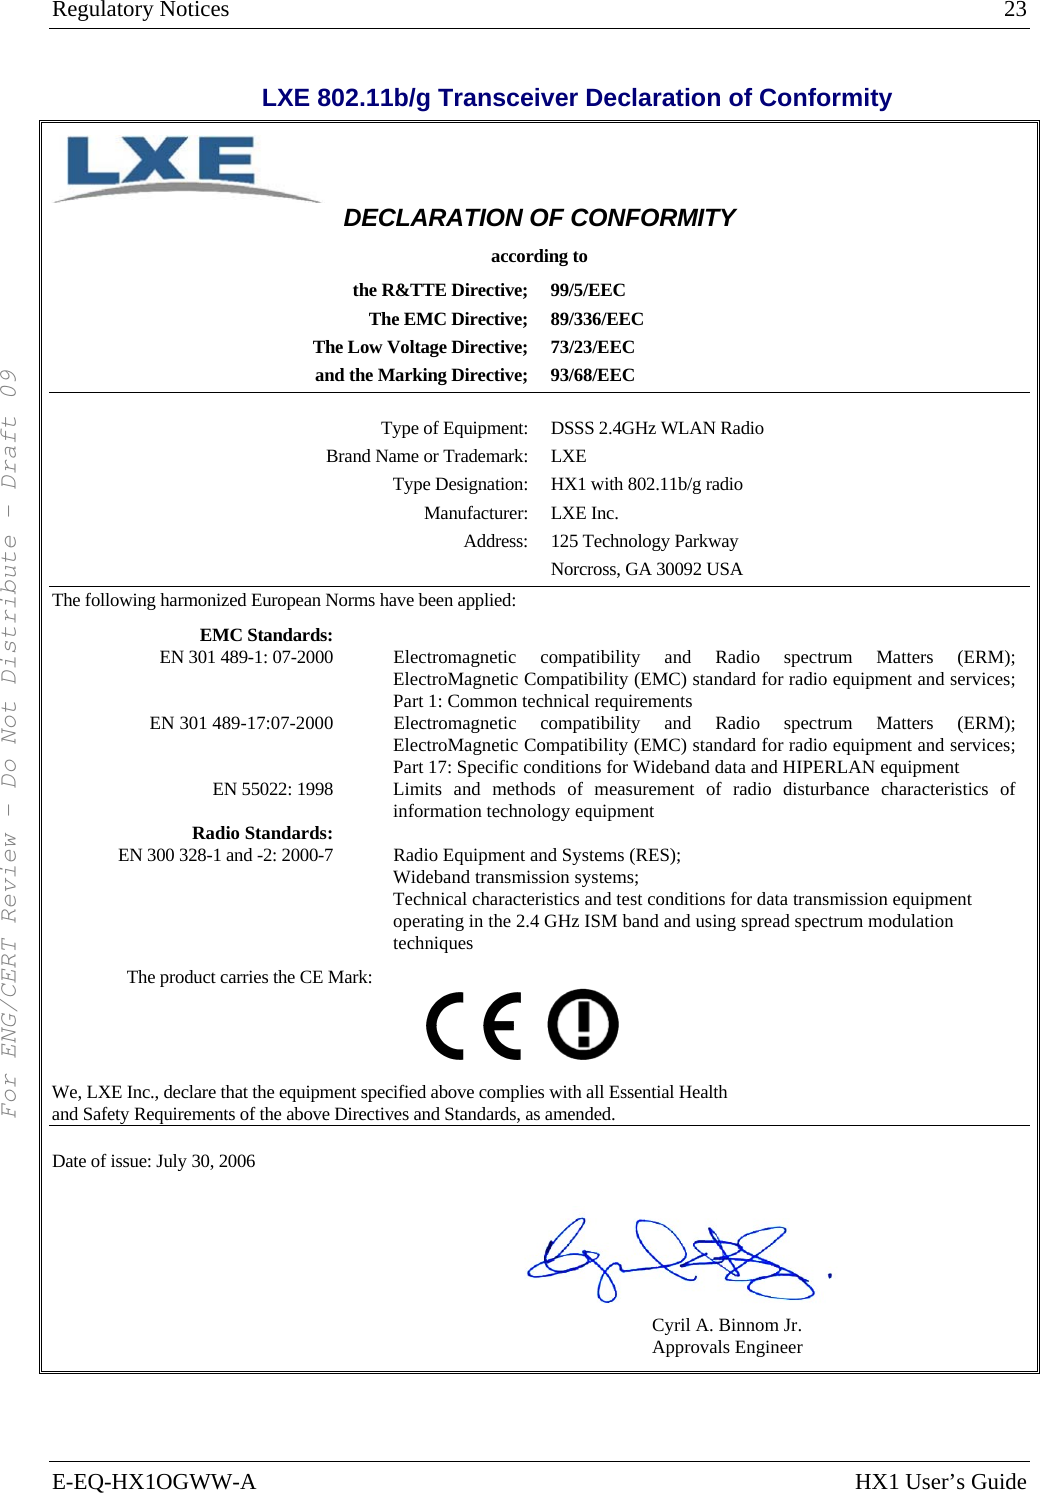 Regulatory Notices  23 E-EQ-HX1OGWW-A  HX1 User’s Guide  LXE 802.11b/g Transceiver Declaration of Conformity  DECLARATION OF CONFORMITY according to the R&amp;TTE Directive;  99/5/EEC The EMC Directive;  89/336/EEC The Low Voltage Directive;  73/23/EEC and the Marking Directive;  93/68/EEC   Type of Equipment: DSSS 2.4GHz WLAN Radio Brand Name or Trademark: LXE Type Designation: HX1 with 802.11b/g radio Manufacturer: LXE Inc. Address: 125 Technology Parkway   Norcross, GA 30092 USA The following harmonized European Norms have been applied:    EMC Standards:   EN 301 489-1: 07-2000    Electromagnetic  compatibility and Radio spectrum Matters (ERM); ElectroMagnetic Compatibility (EMC) standard for radio equipment and services; Part 1: Common technical requirements EN 301 489-17:07-2000    Electromagnetic  compatibility and Radio spectrum Matters (ERM); ElectroMagnetic Compatibility (EMC) standard for radio equipment and services; Part 17: Specific conditions for Wideband data and HIPERLAN equipment EN 55022: 1998   Limits and methods of measurement of radio disturbance characteristics of information technology equipment Radio Standards:    EN 300 328-1 and -2: 2000-7    Radio Equipment and Systems (RES); Wideband transmission systems; Technical characteristics and test conditions for data transmission equipment operating in the 2.4 GHz ISM band and using spread spectrum modulation techniques The product carries the CE Mark:           We, LXE Inc., declare that the equipment specified above complies with all Essential Health  and Safety Requirements of the above Directives and Standards, as amended.  Date of issue: July 30, 2006                               Cyril A. Binnom Jr. Approvals Engineer For ENG/CERT Review - Do Not Distribute - Draft 09